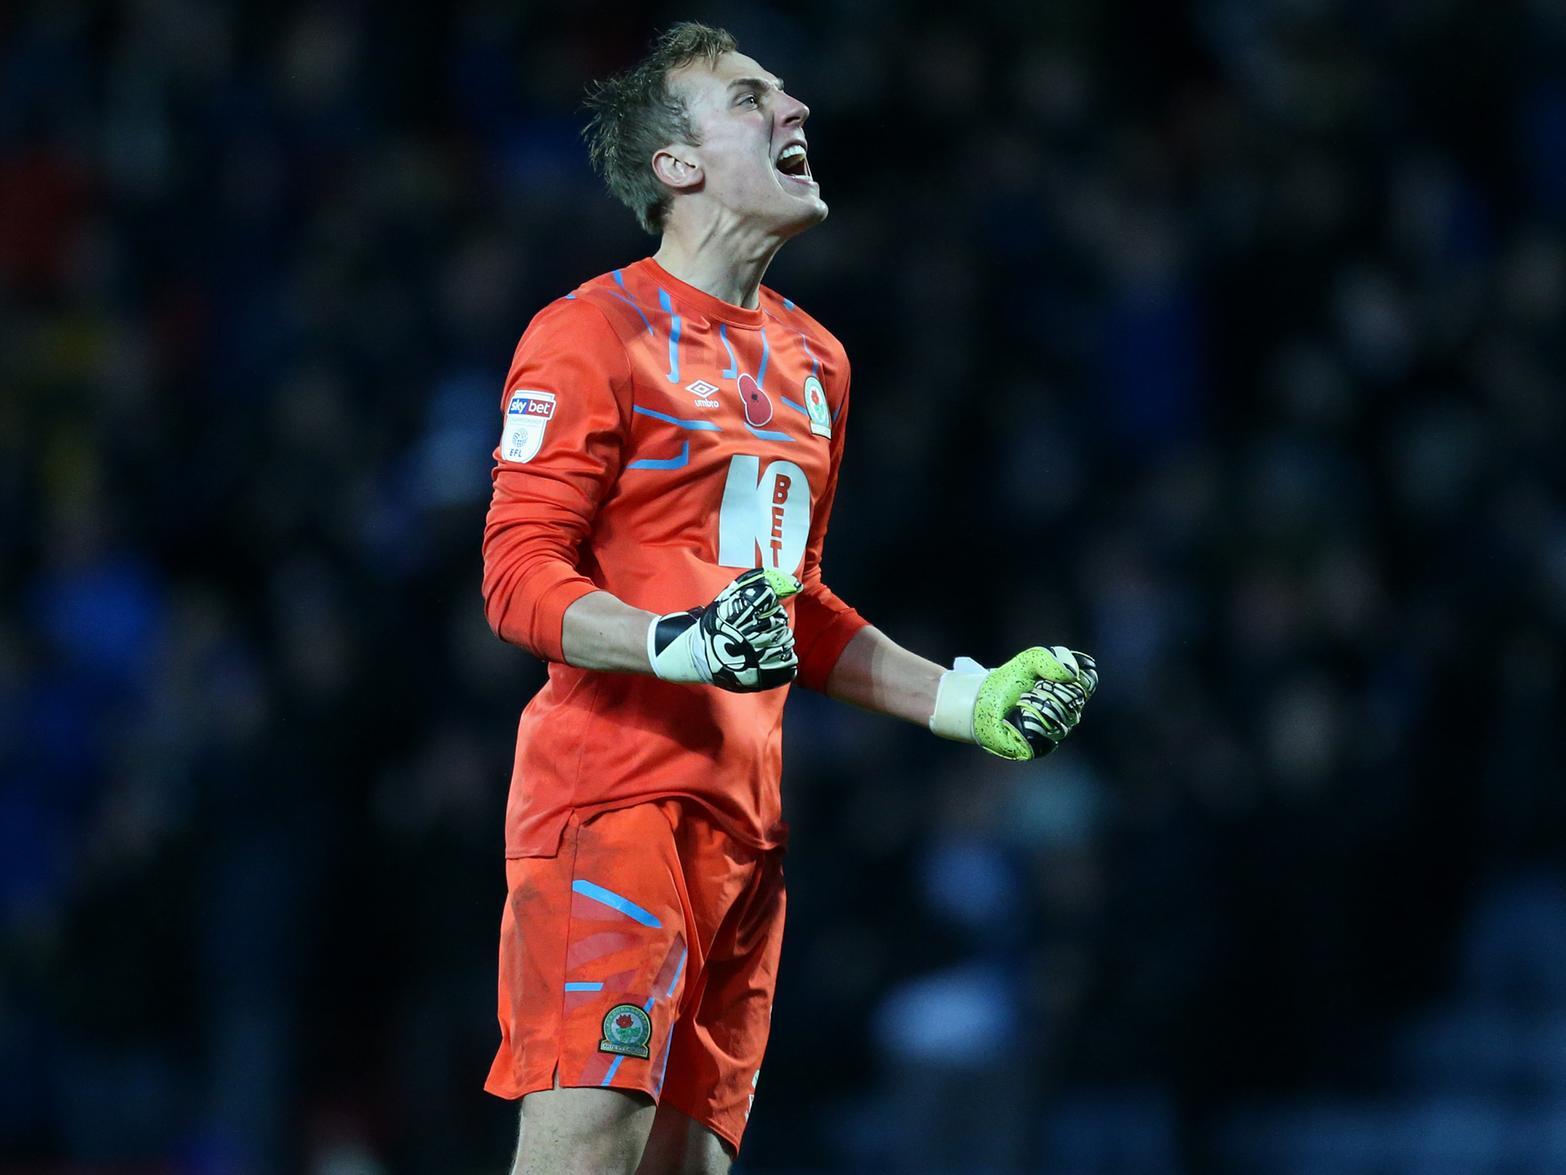 Wigan Athletic were desperate to get him on a permanent deal this season, but he opted to join Rovers instead. He's started every league game, and has racked up five clean sheets.